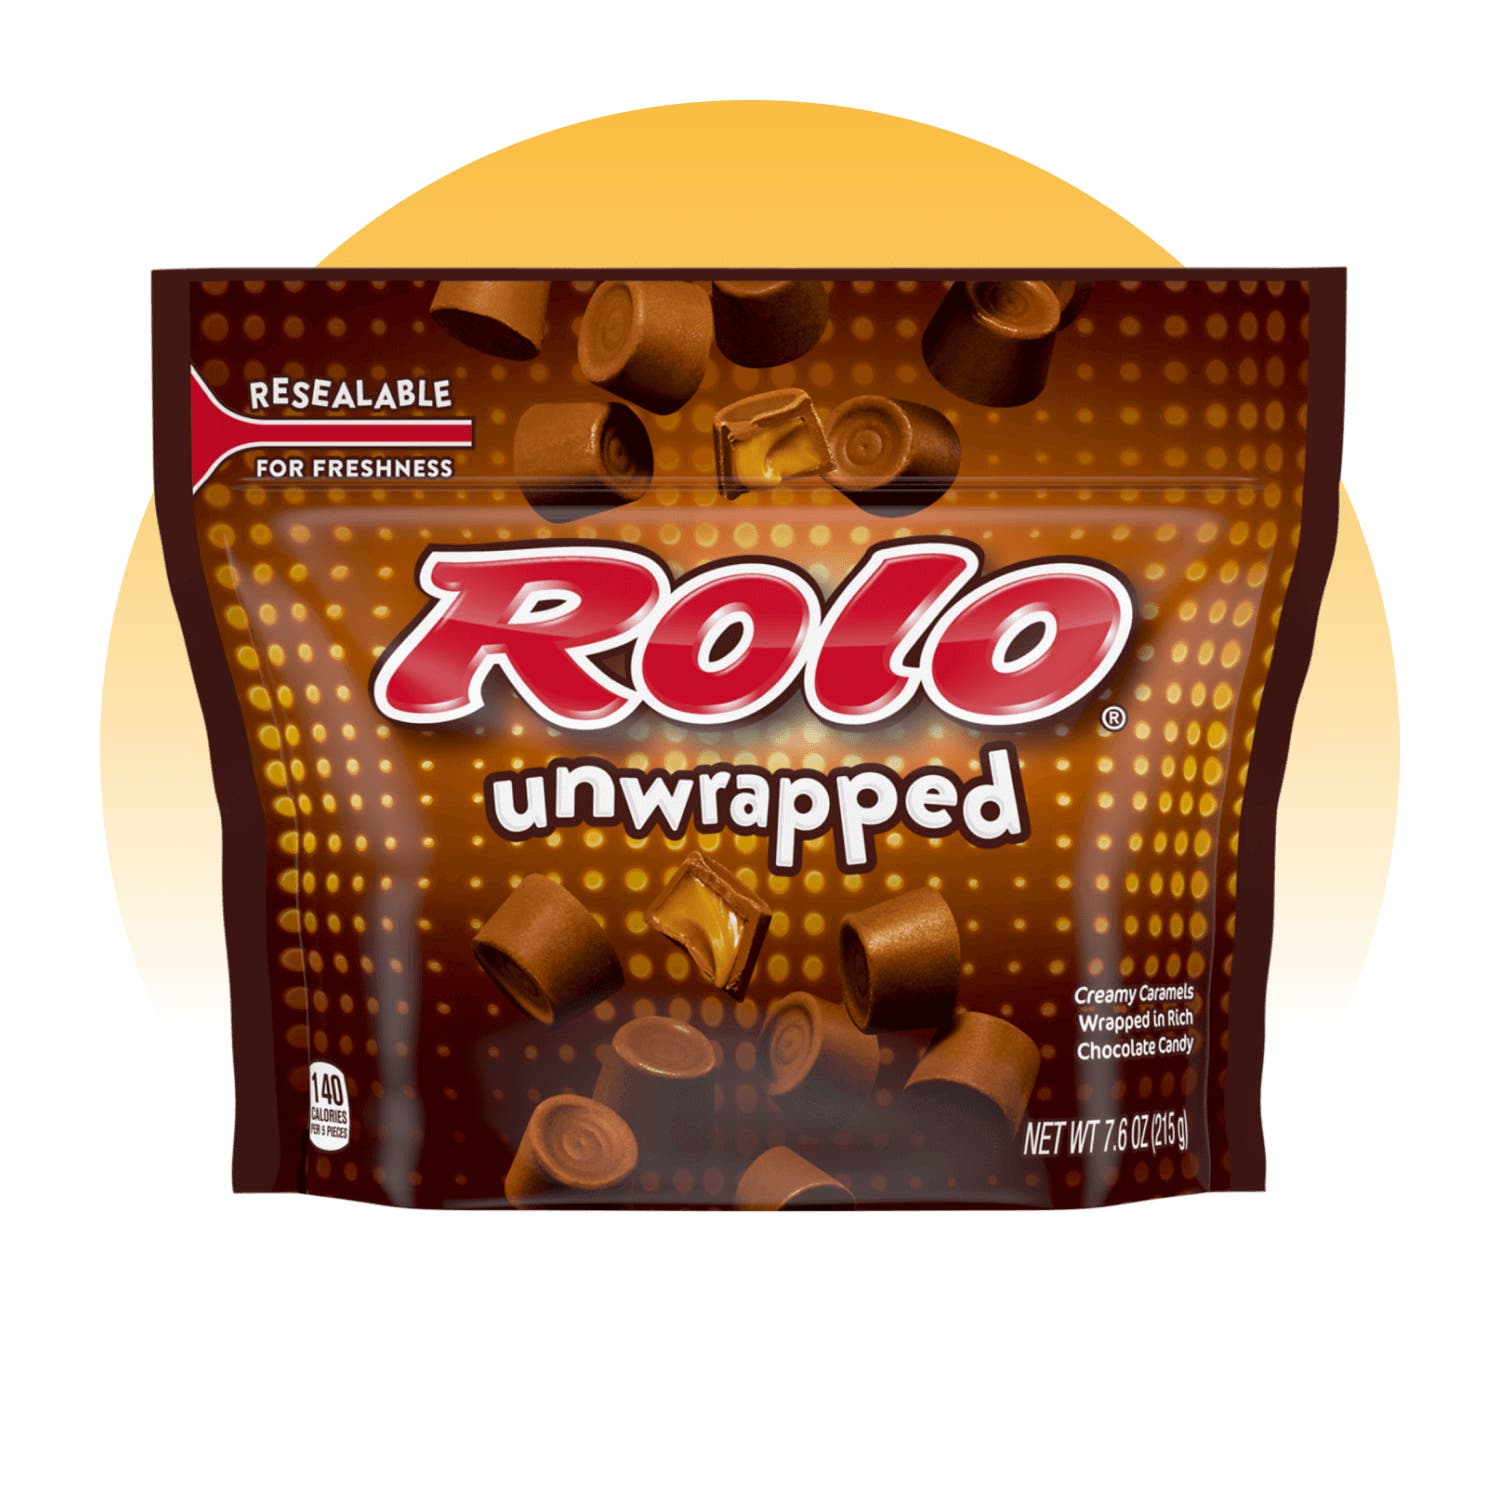 bag of unwrapped rolo creamy caramels